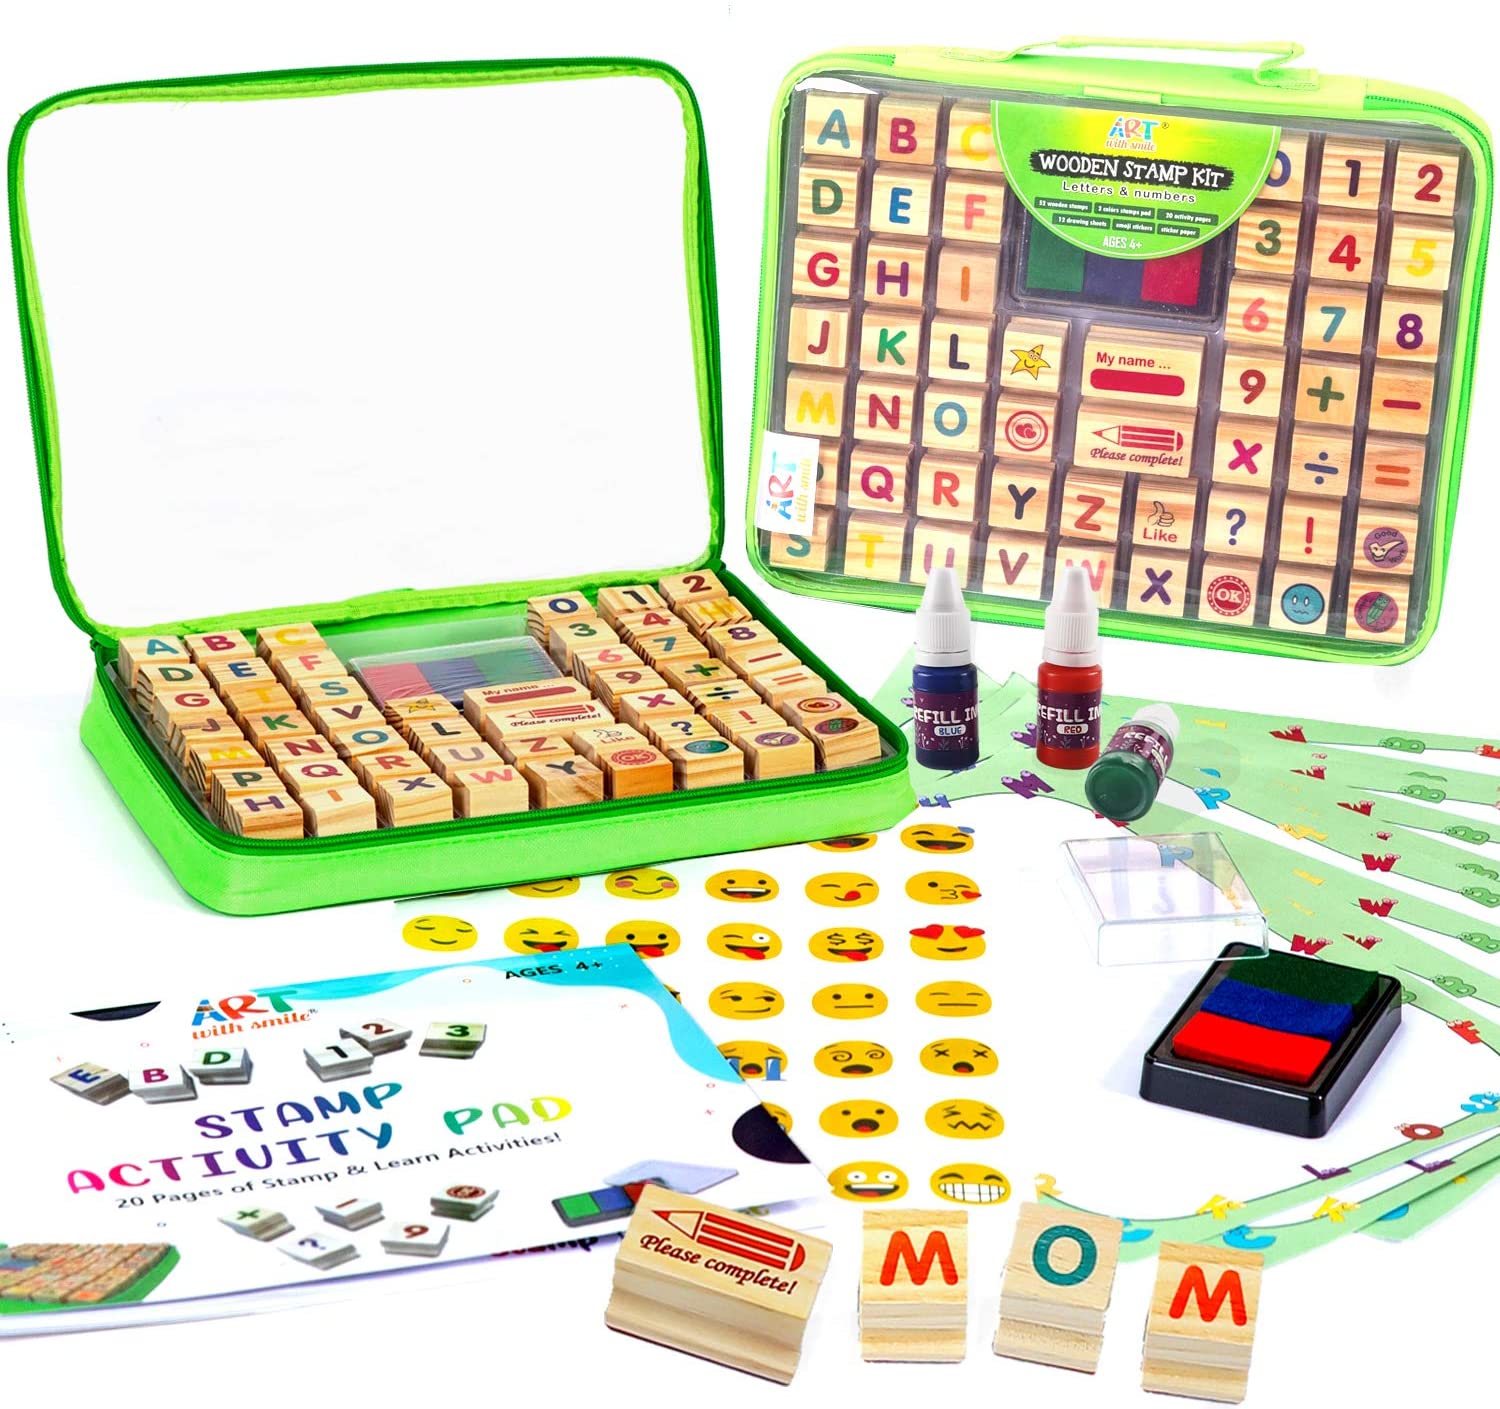 Wooden Stamp Set for Kids with Alphabet Stamps and Carry Case 72 Pcs –  Letters, Numbers, Emojis, 3-Color Washable Ink Pad, 3 refill bottles,  Activity Book, More – ABC 123 Stamps Excellent